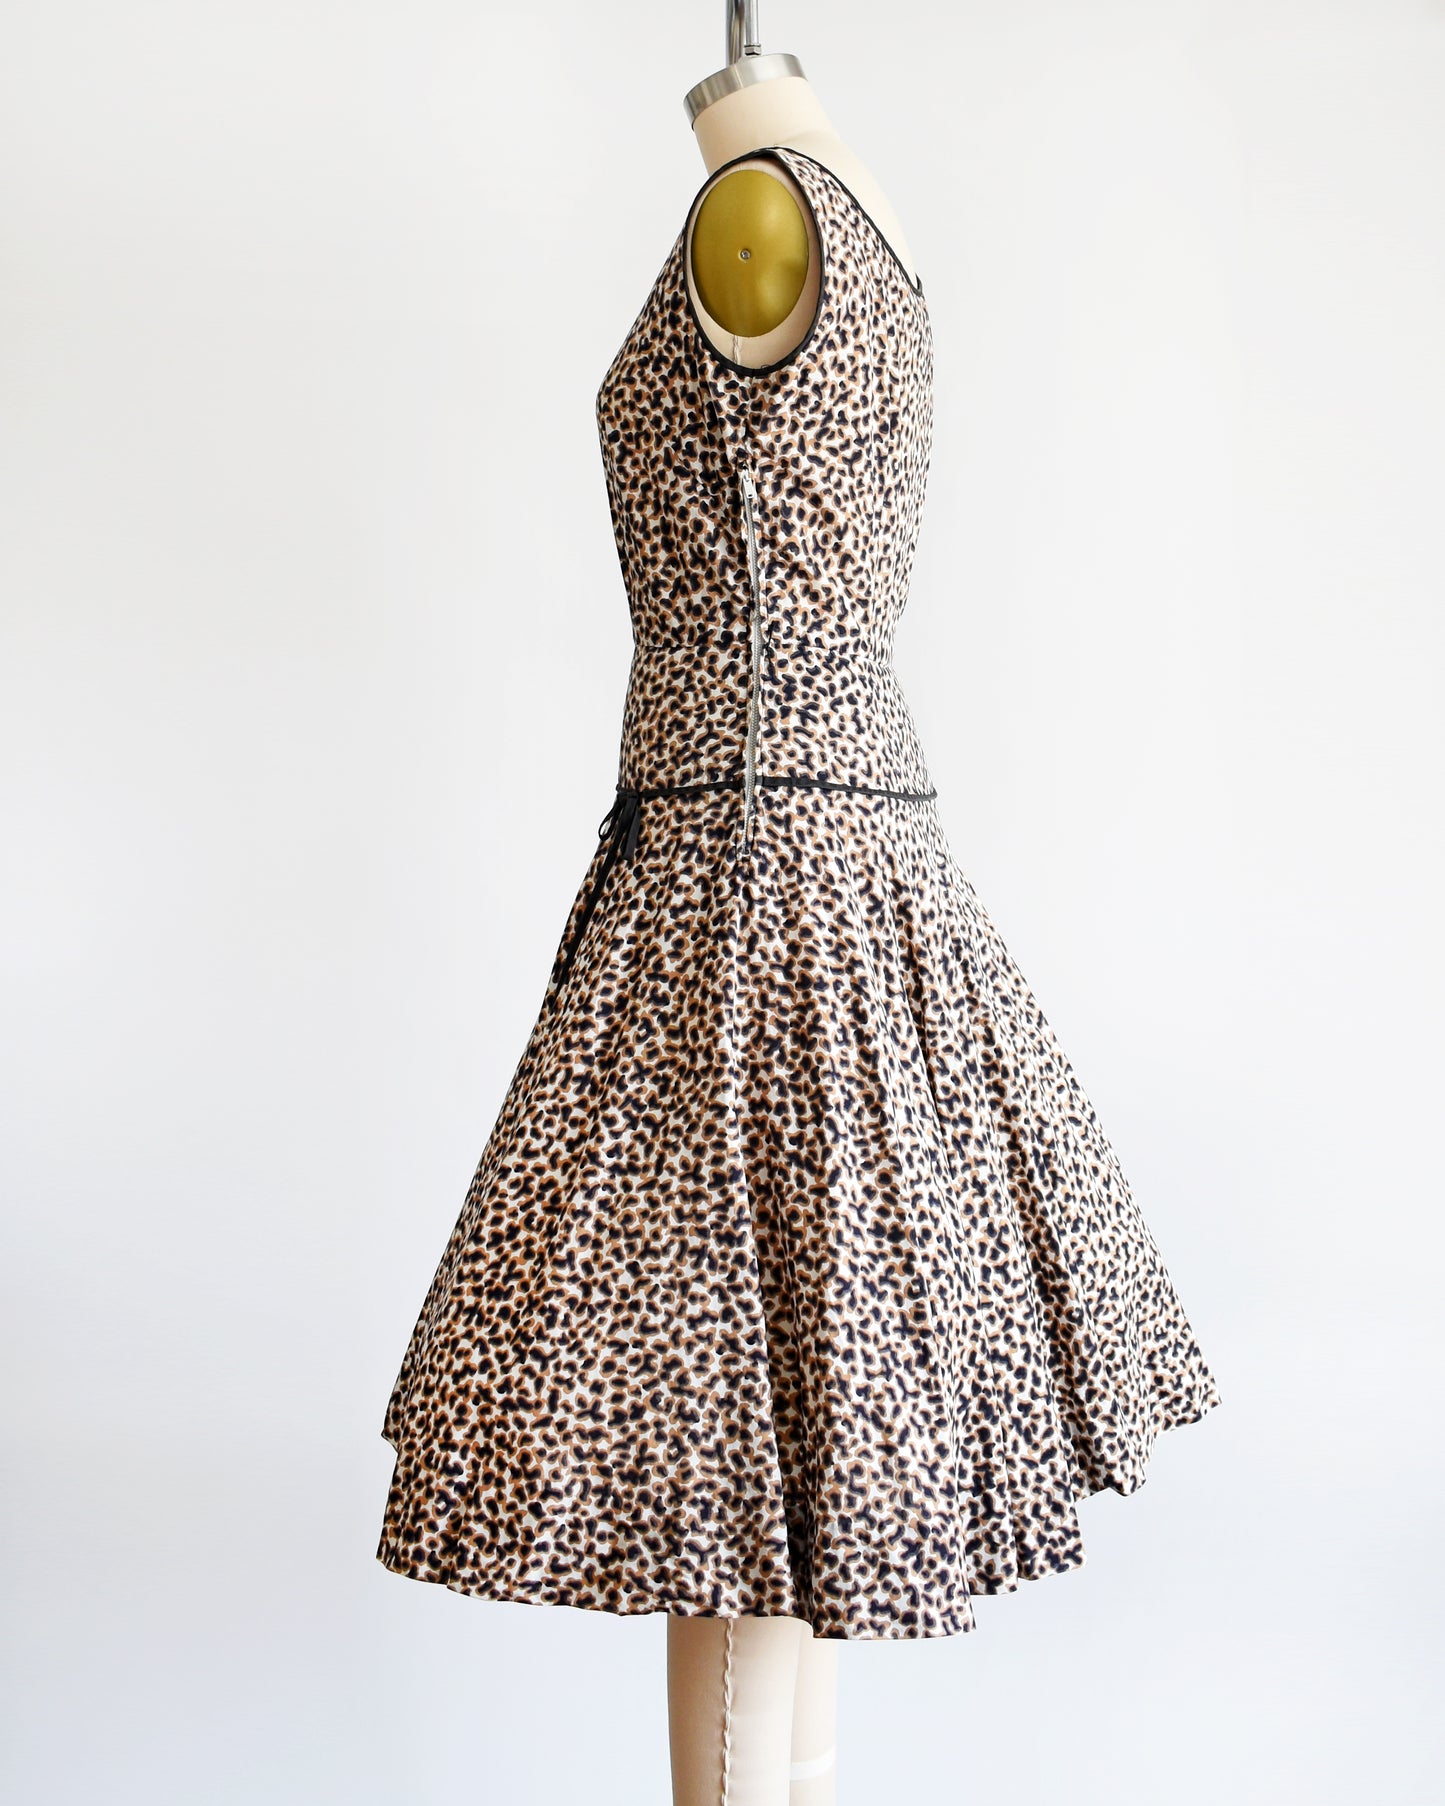 Side view of a vintage 1950s leopard print dress with black trim on a dress form. There is a zipper on the side.